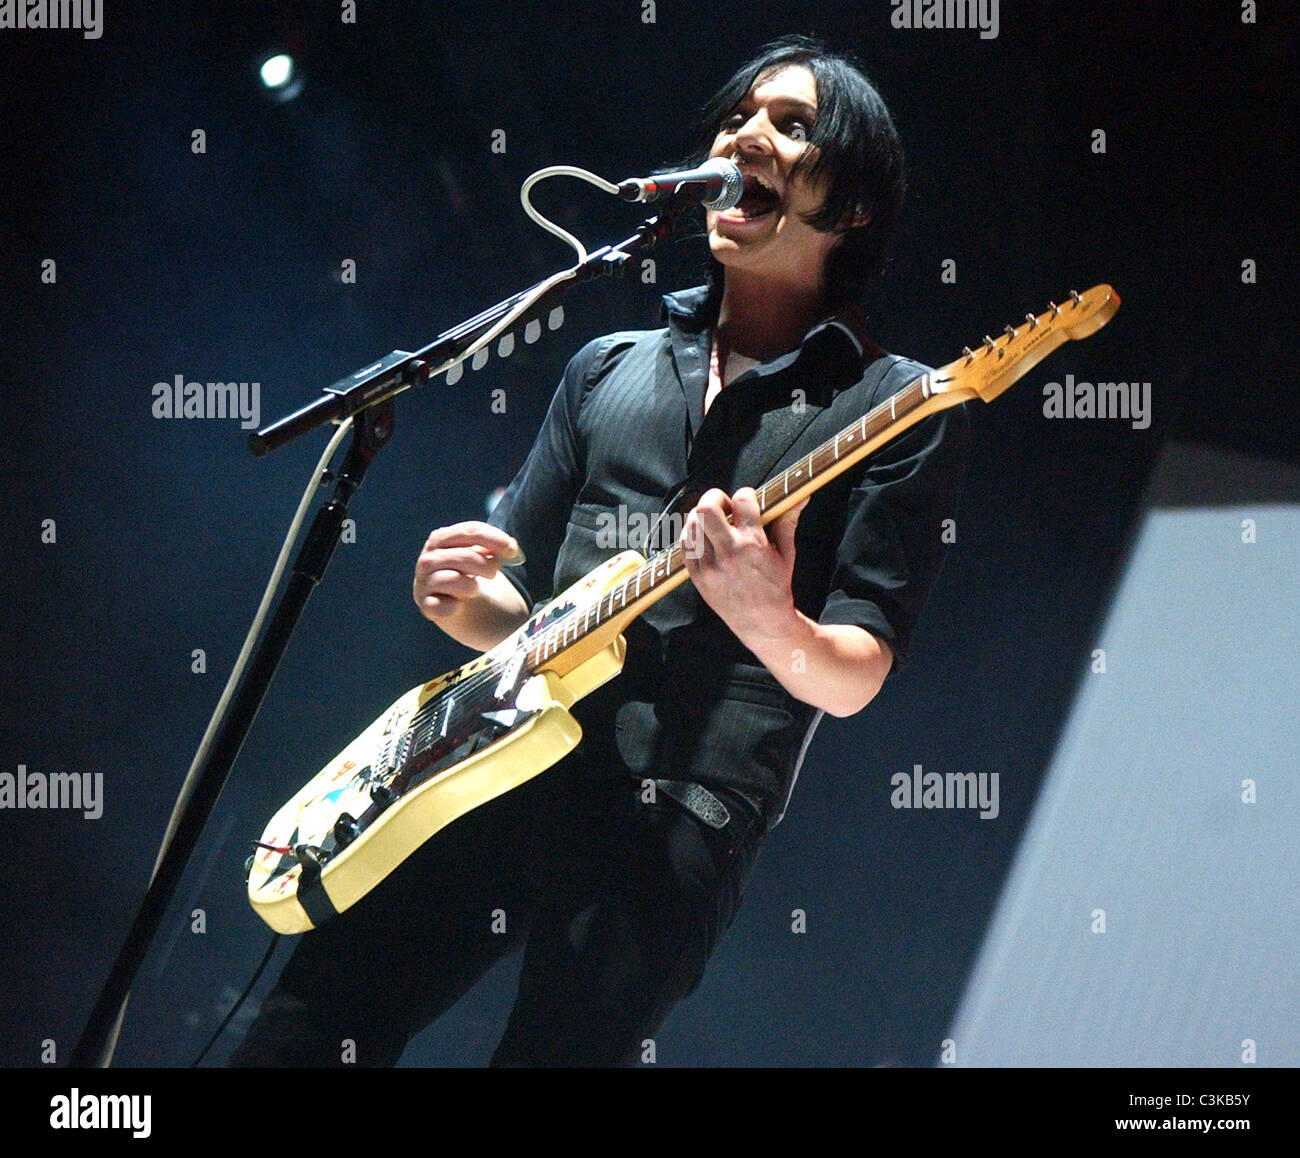 Placebo performing live in concert at the ahoy stadium rotterdam hi-res ...